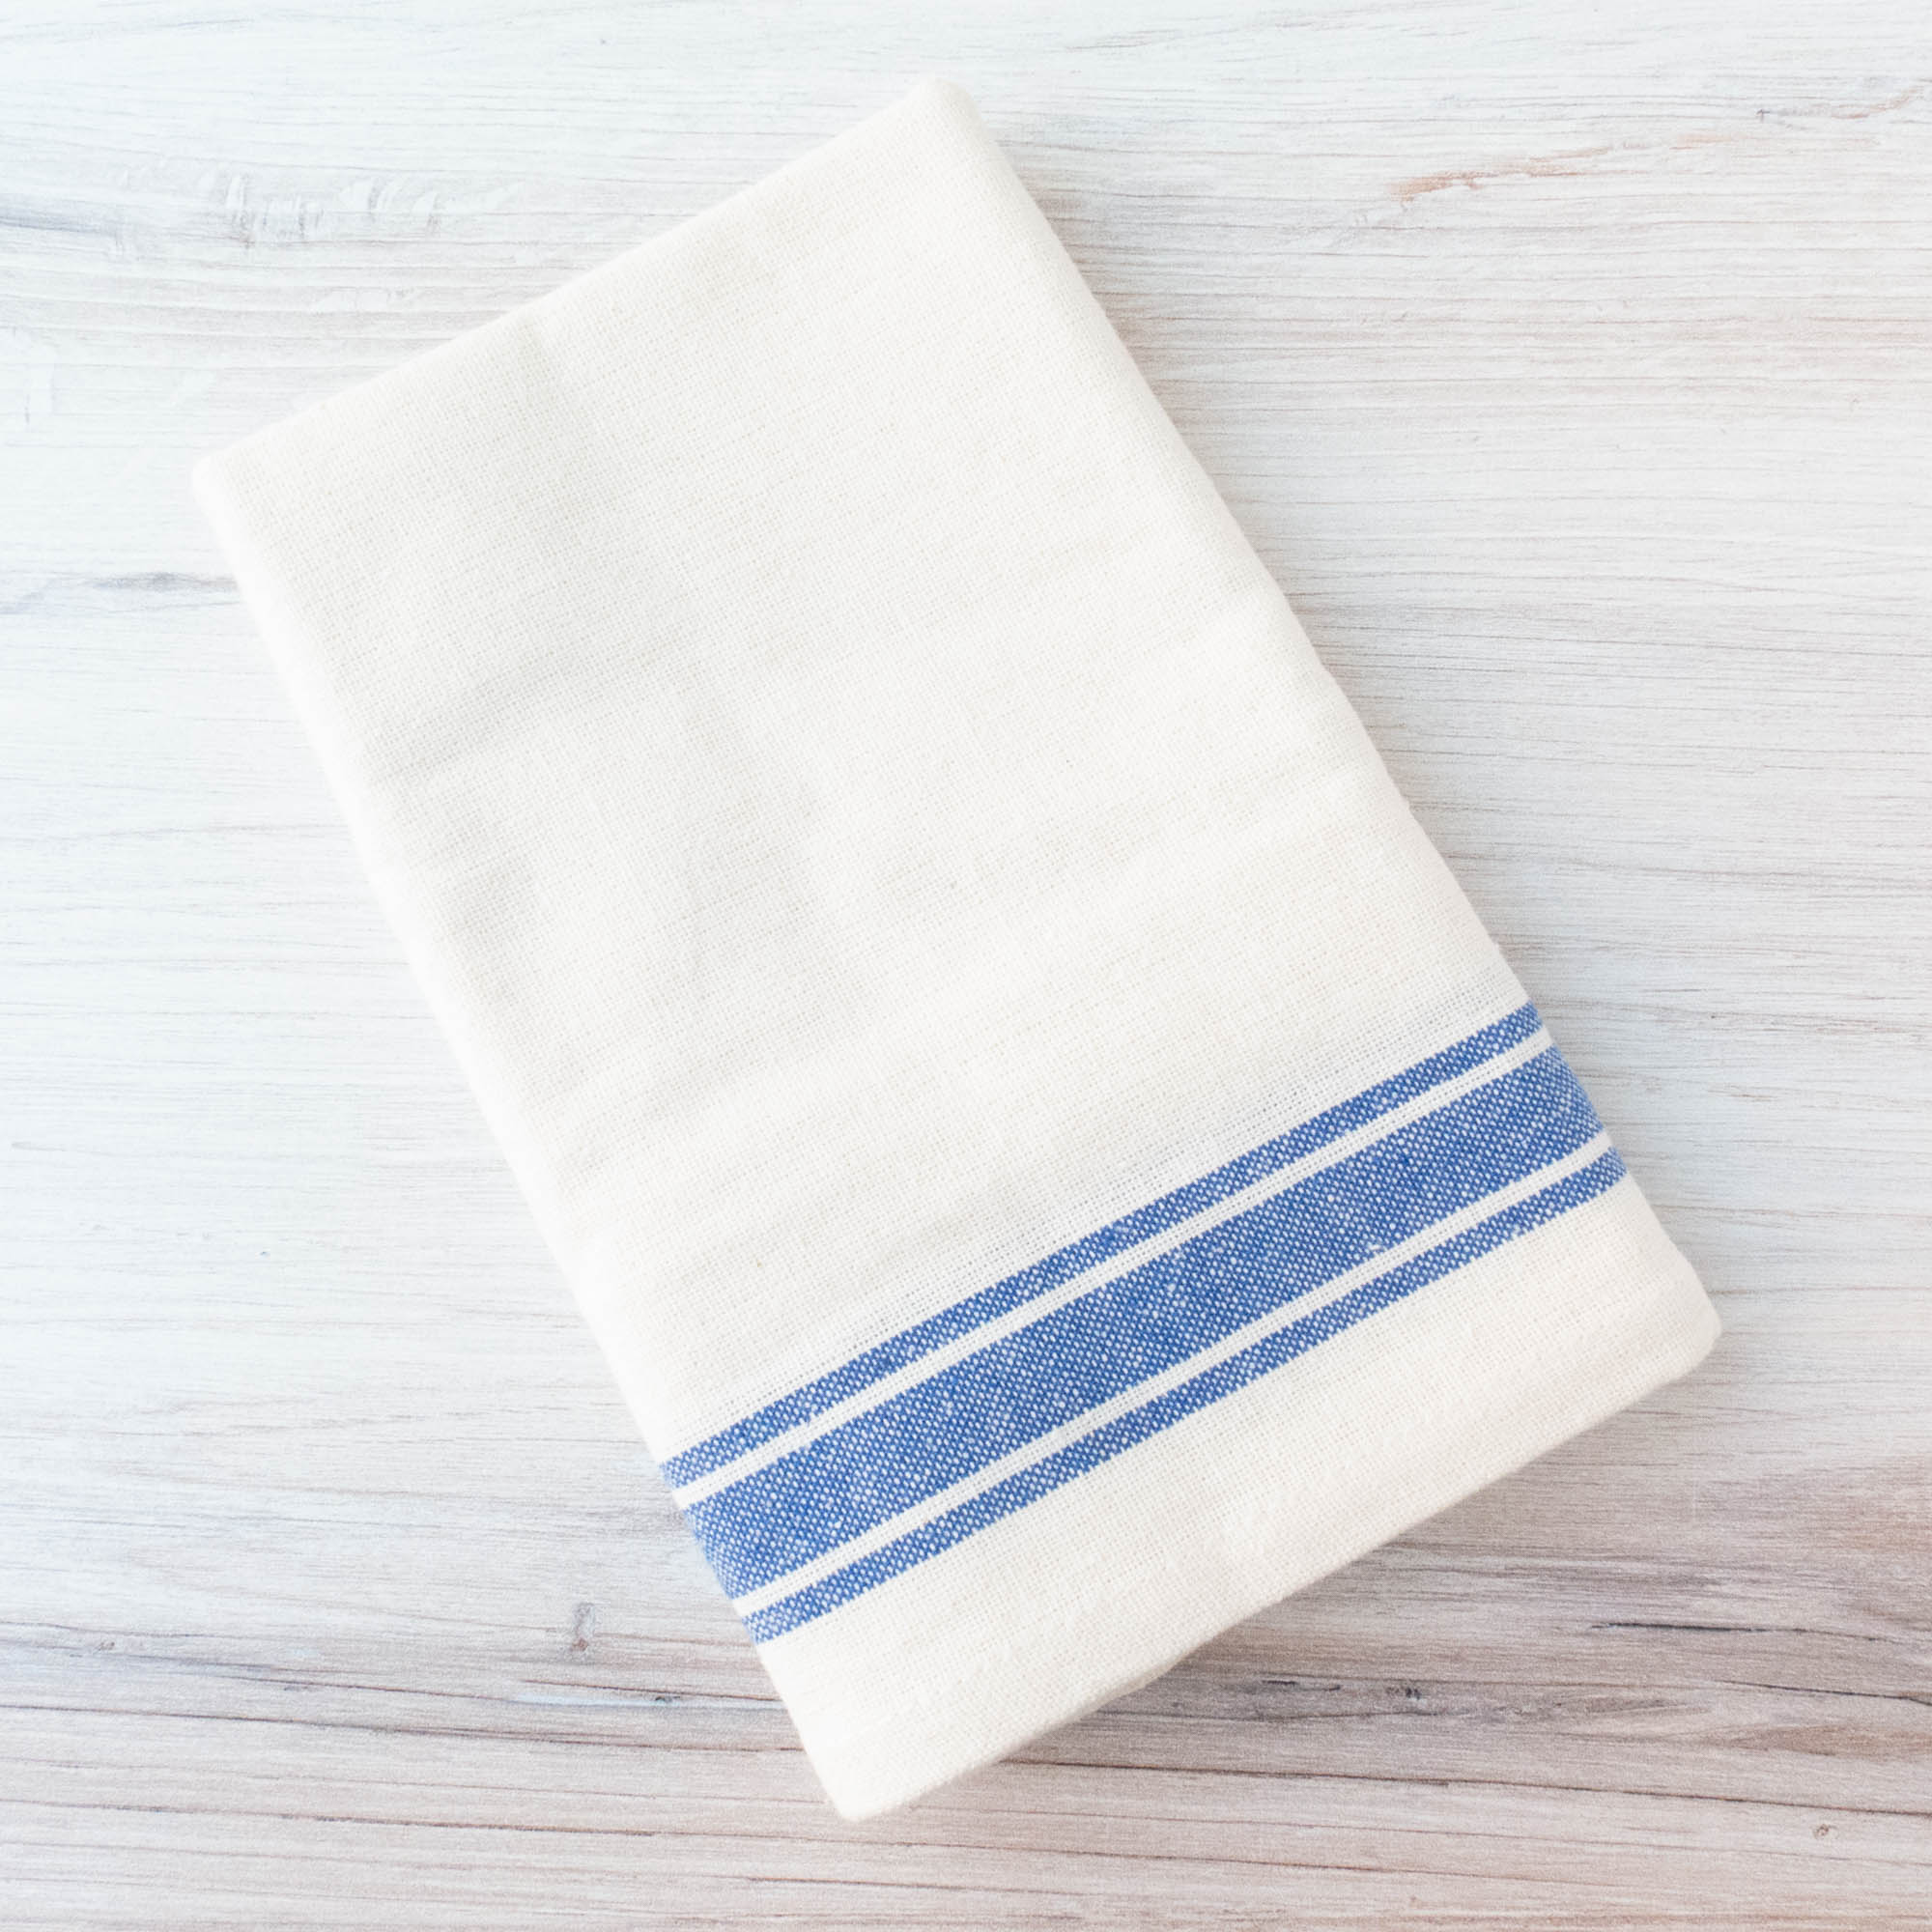 White Tea Towels for Embroidery and Kitchen 18x28 inch Cotton Fabric Pack  of 6